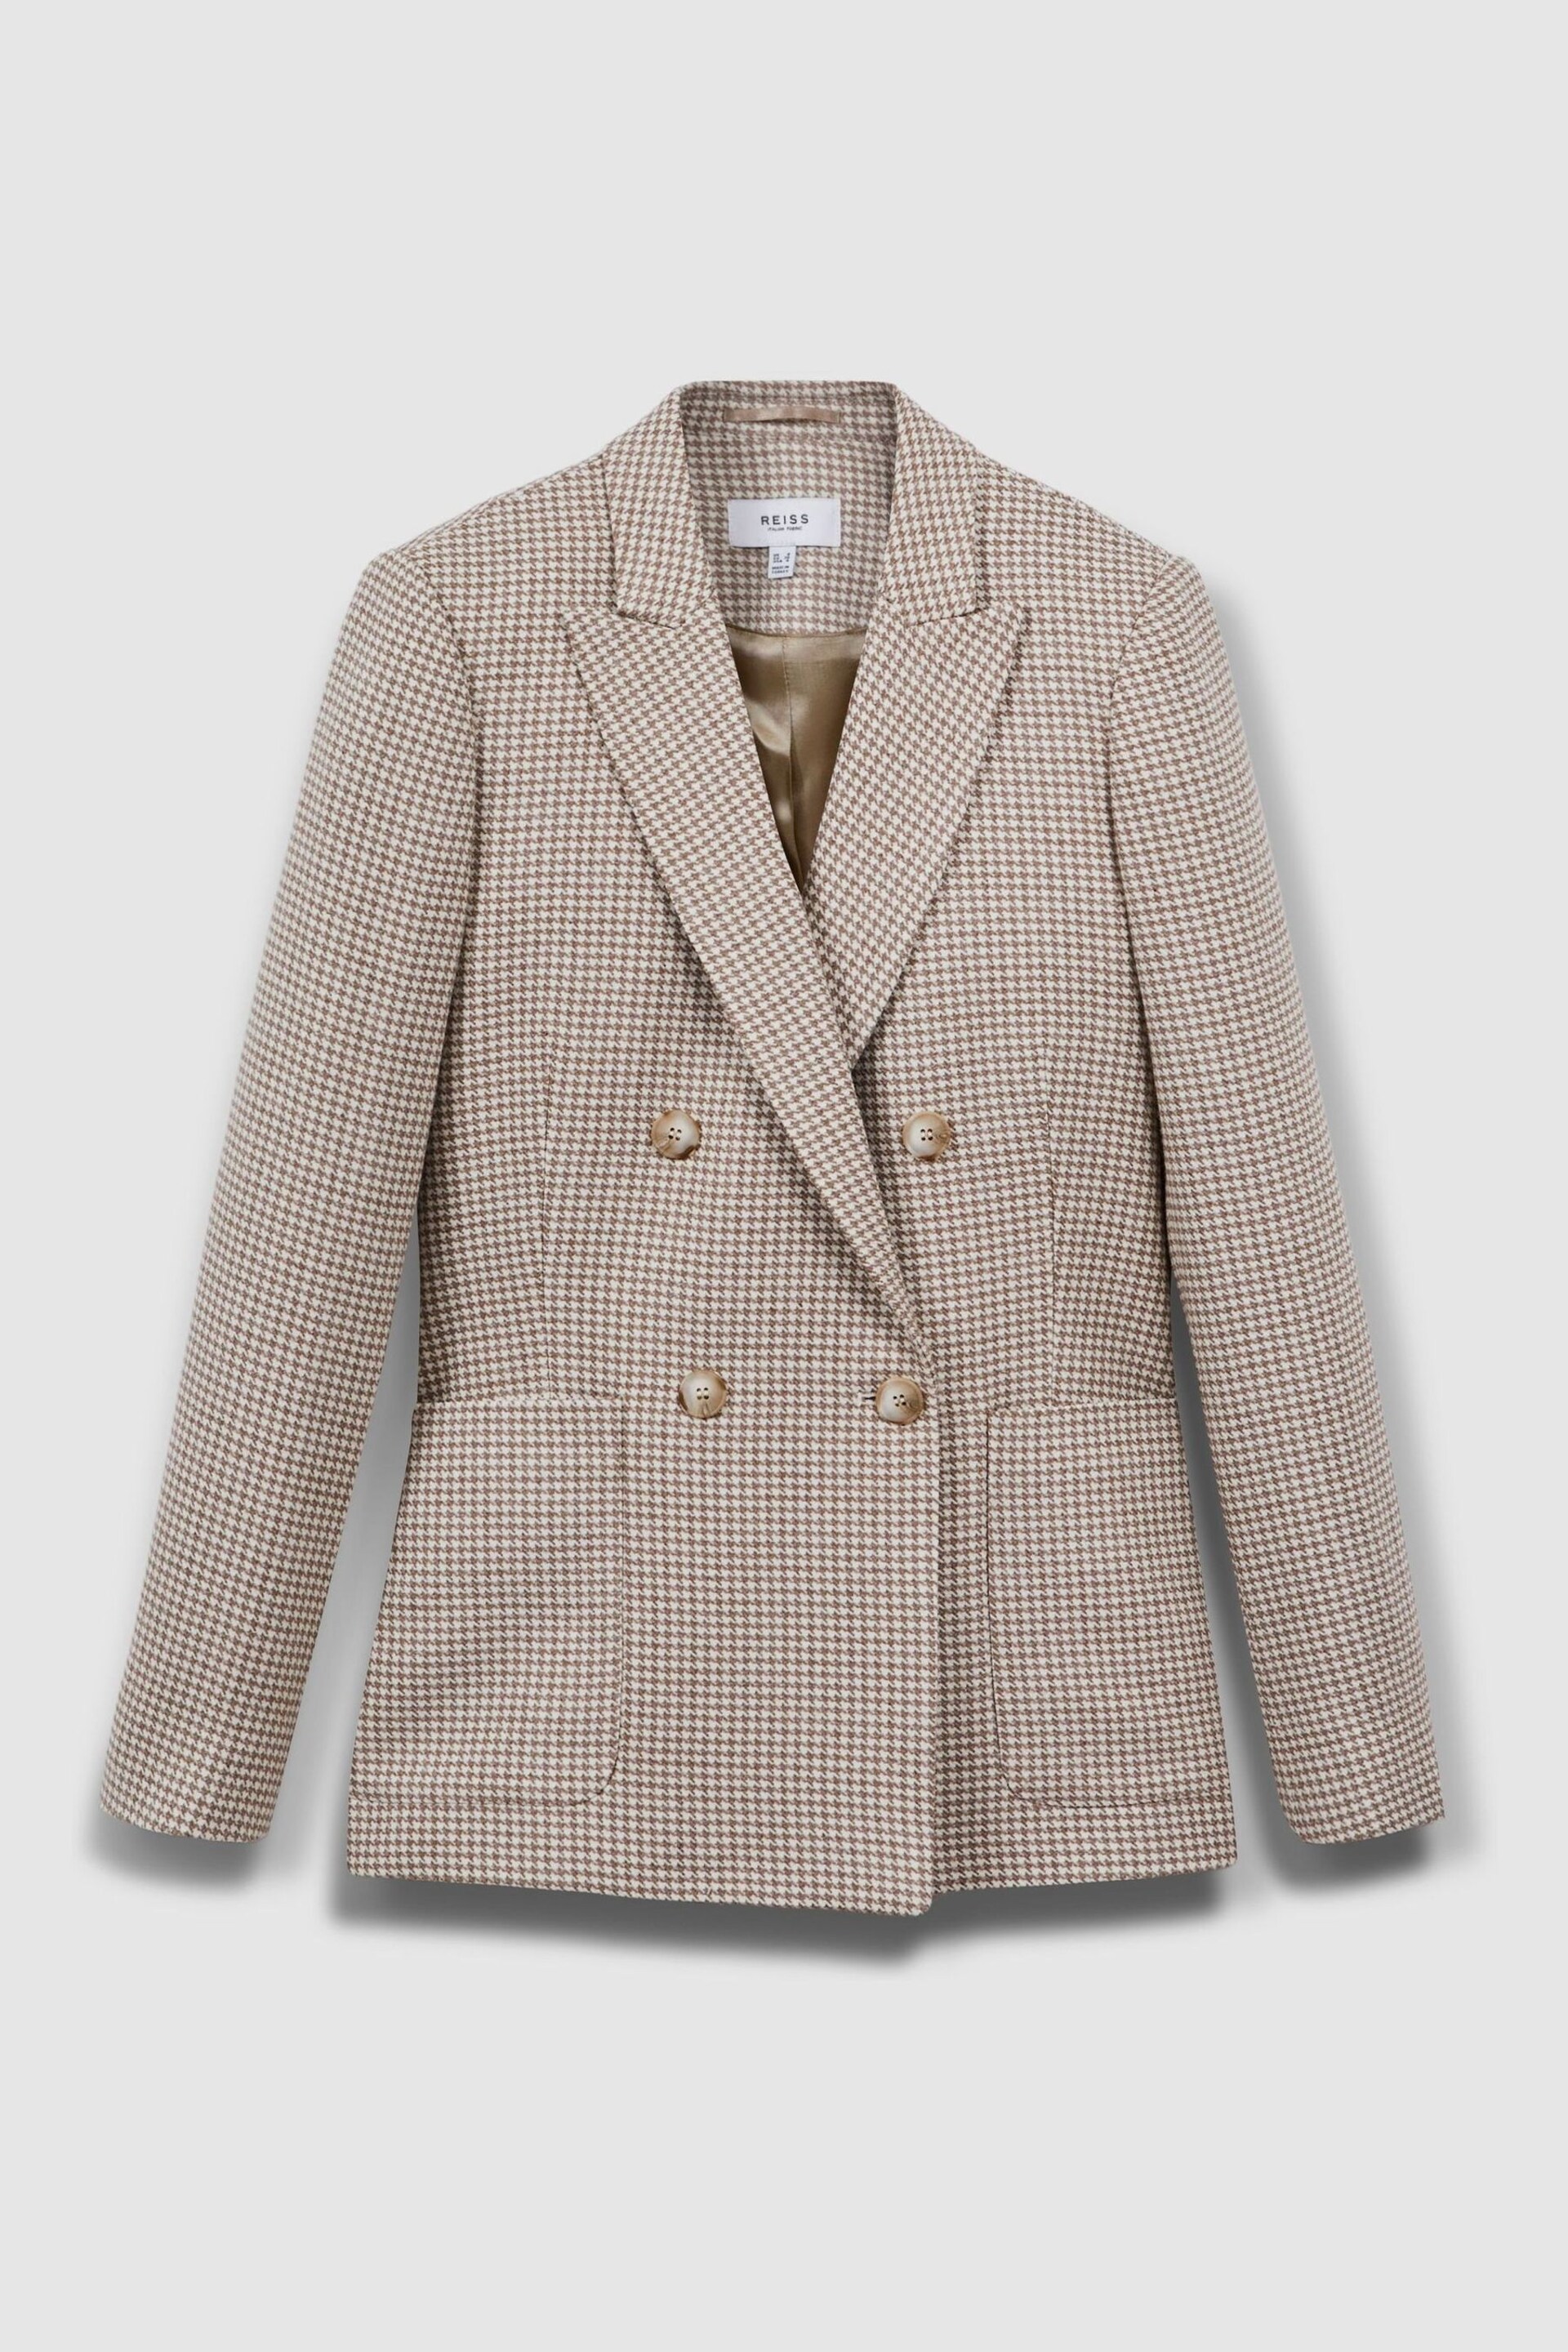 Reiss Beige Check Ella Petite Wool Blend Double Breasted Dogtooth Blazer - Image 2 of 8